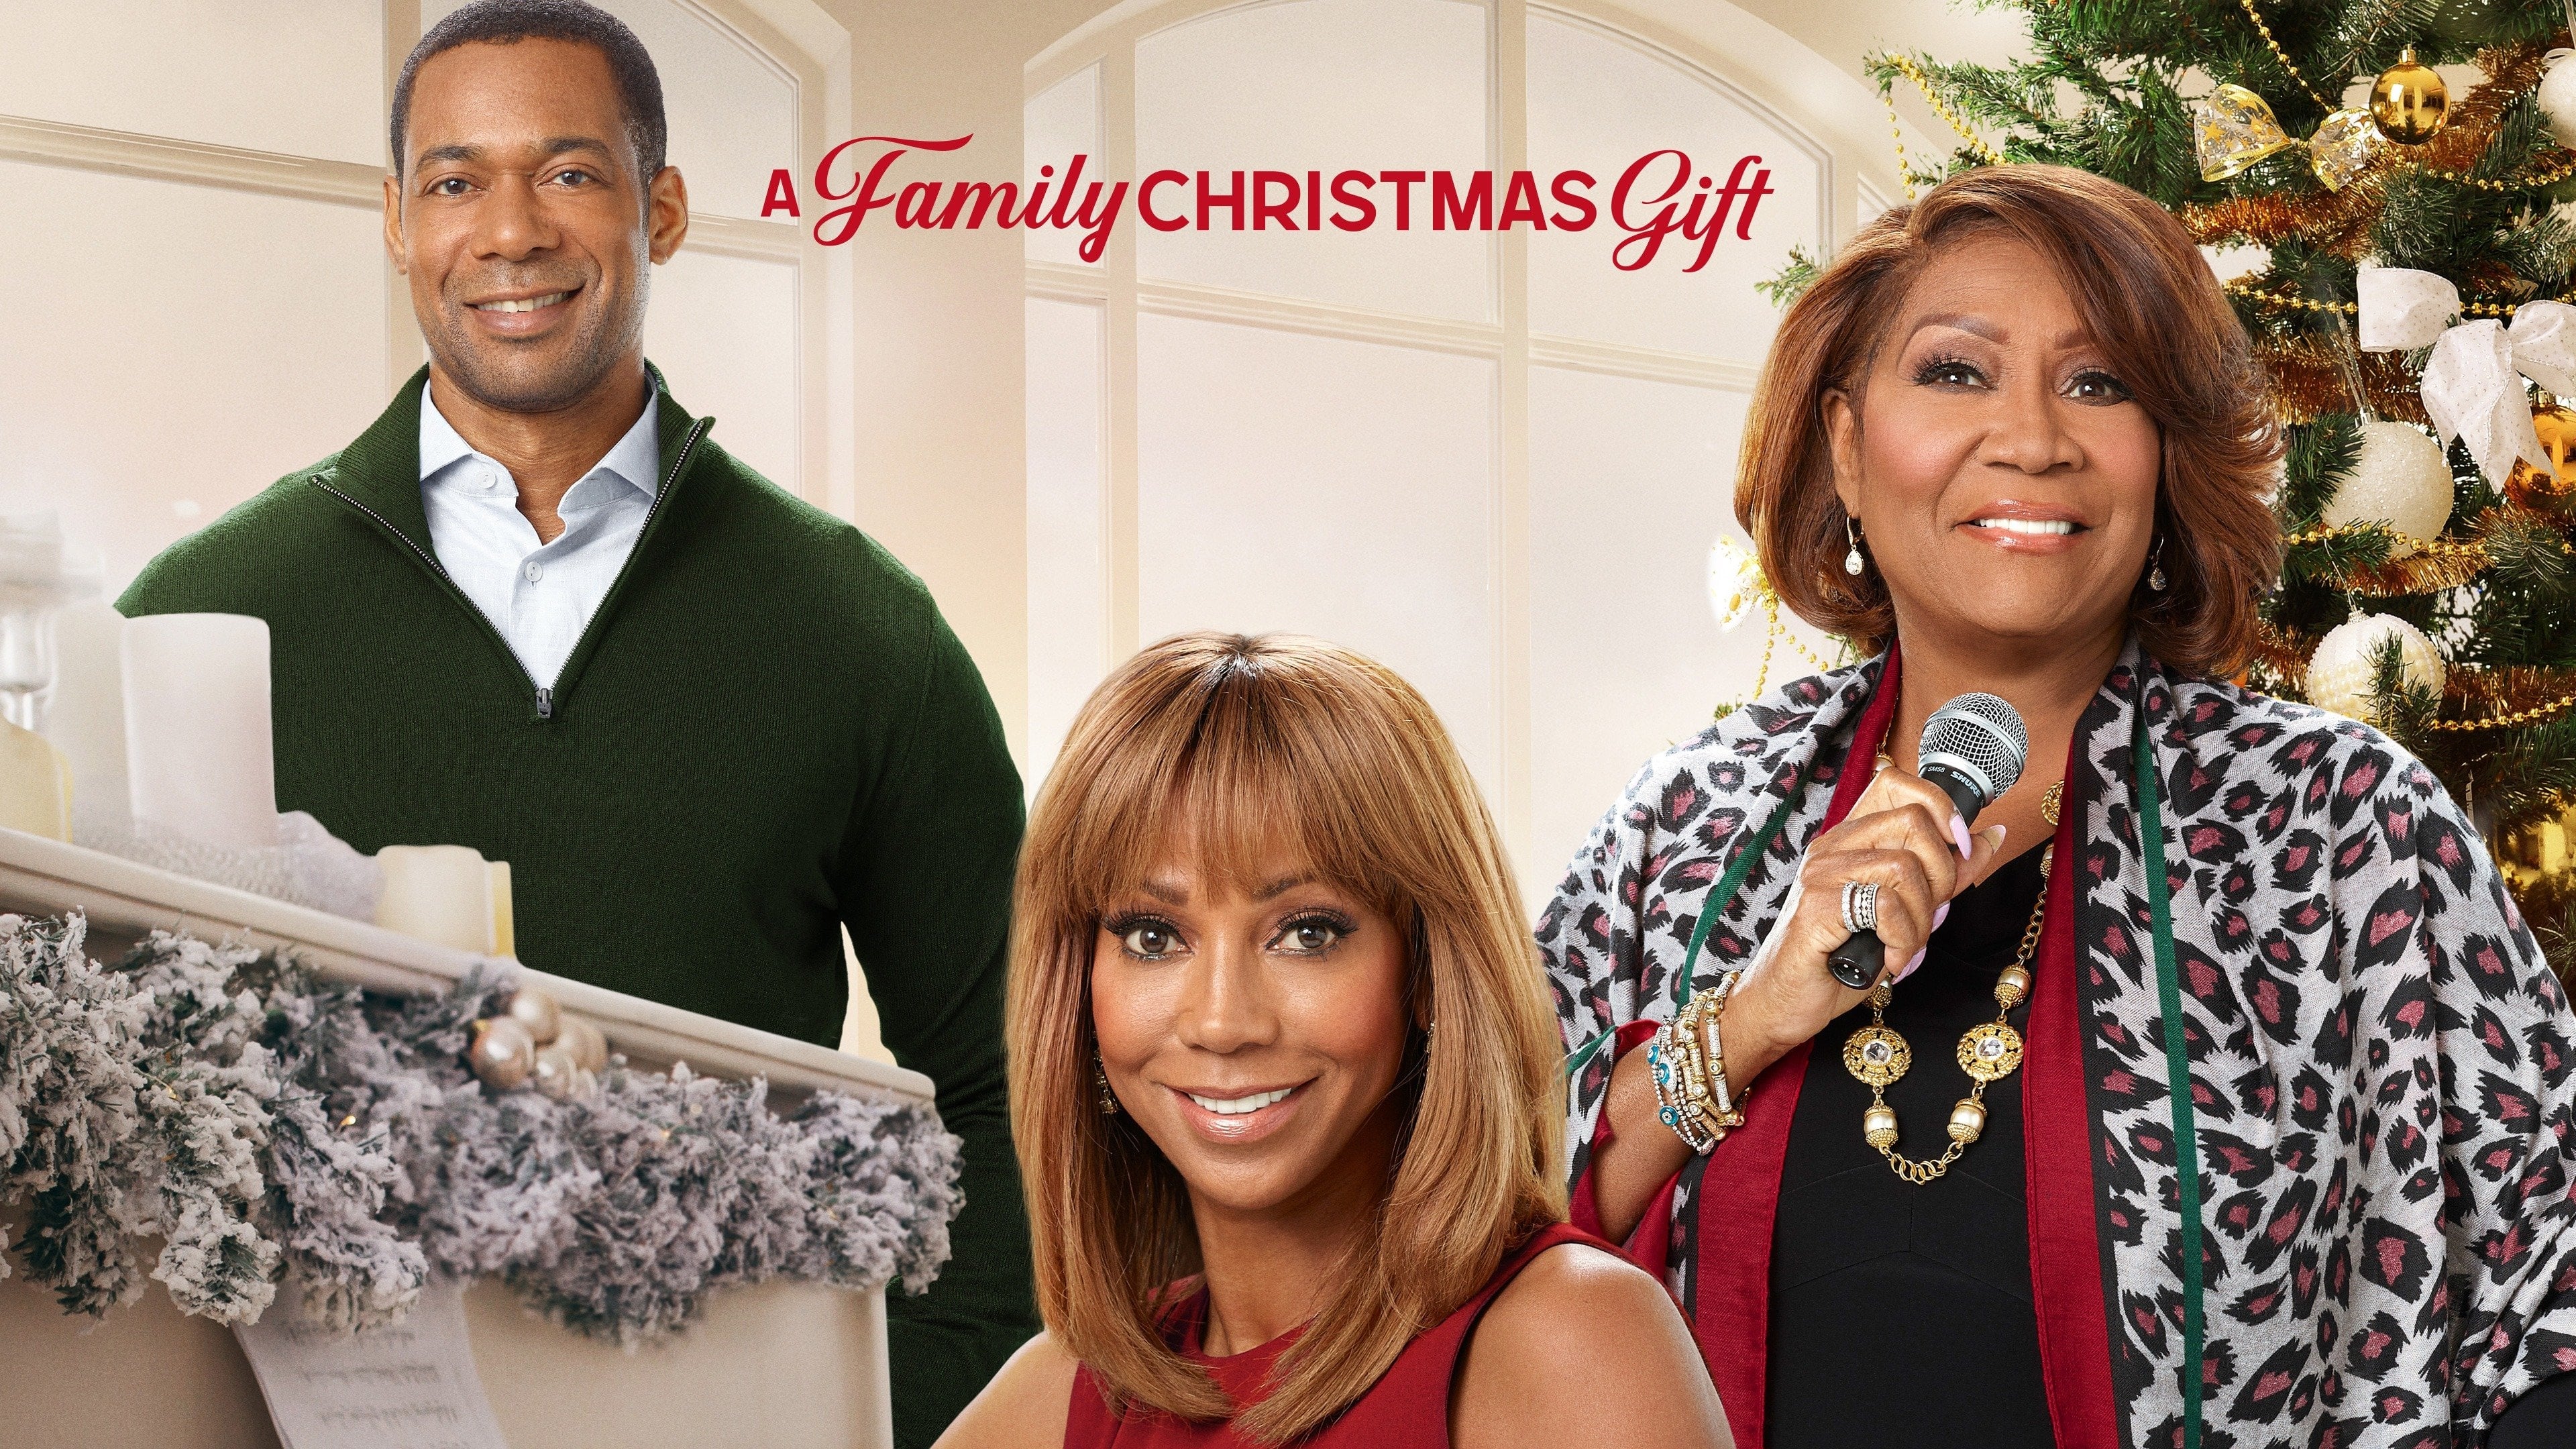 Watch A Family Christmas Gift (2019) Full Movie Online Free | Stream Free Movies & TV Shows